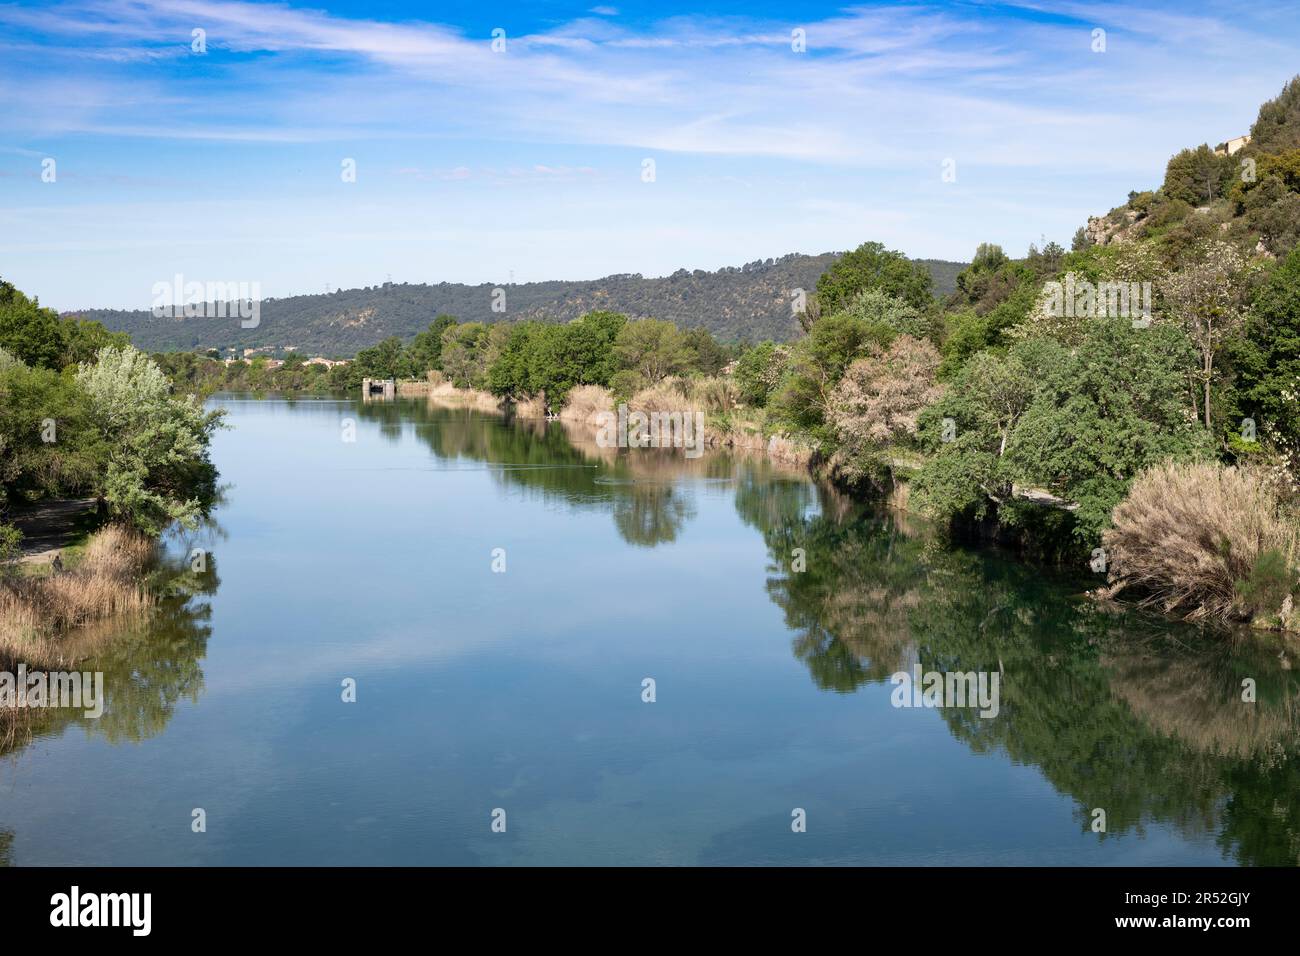 Scenic view with copy space showcasing the picturesque Verdon River in spring, near the charming town of Gréoux-les-Bains, France Stock Photo